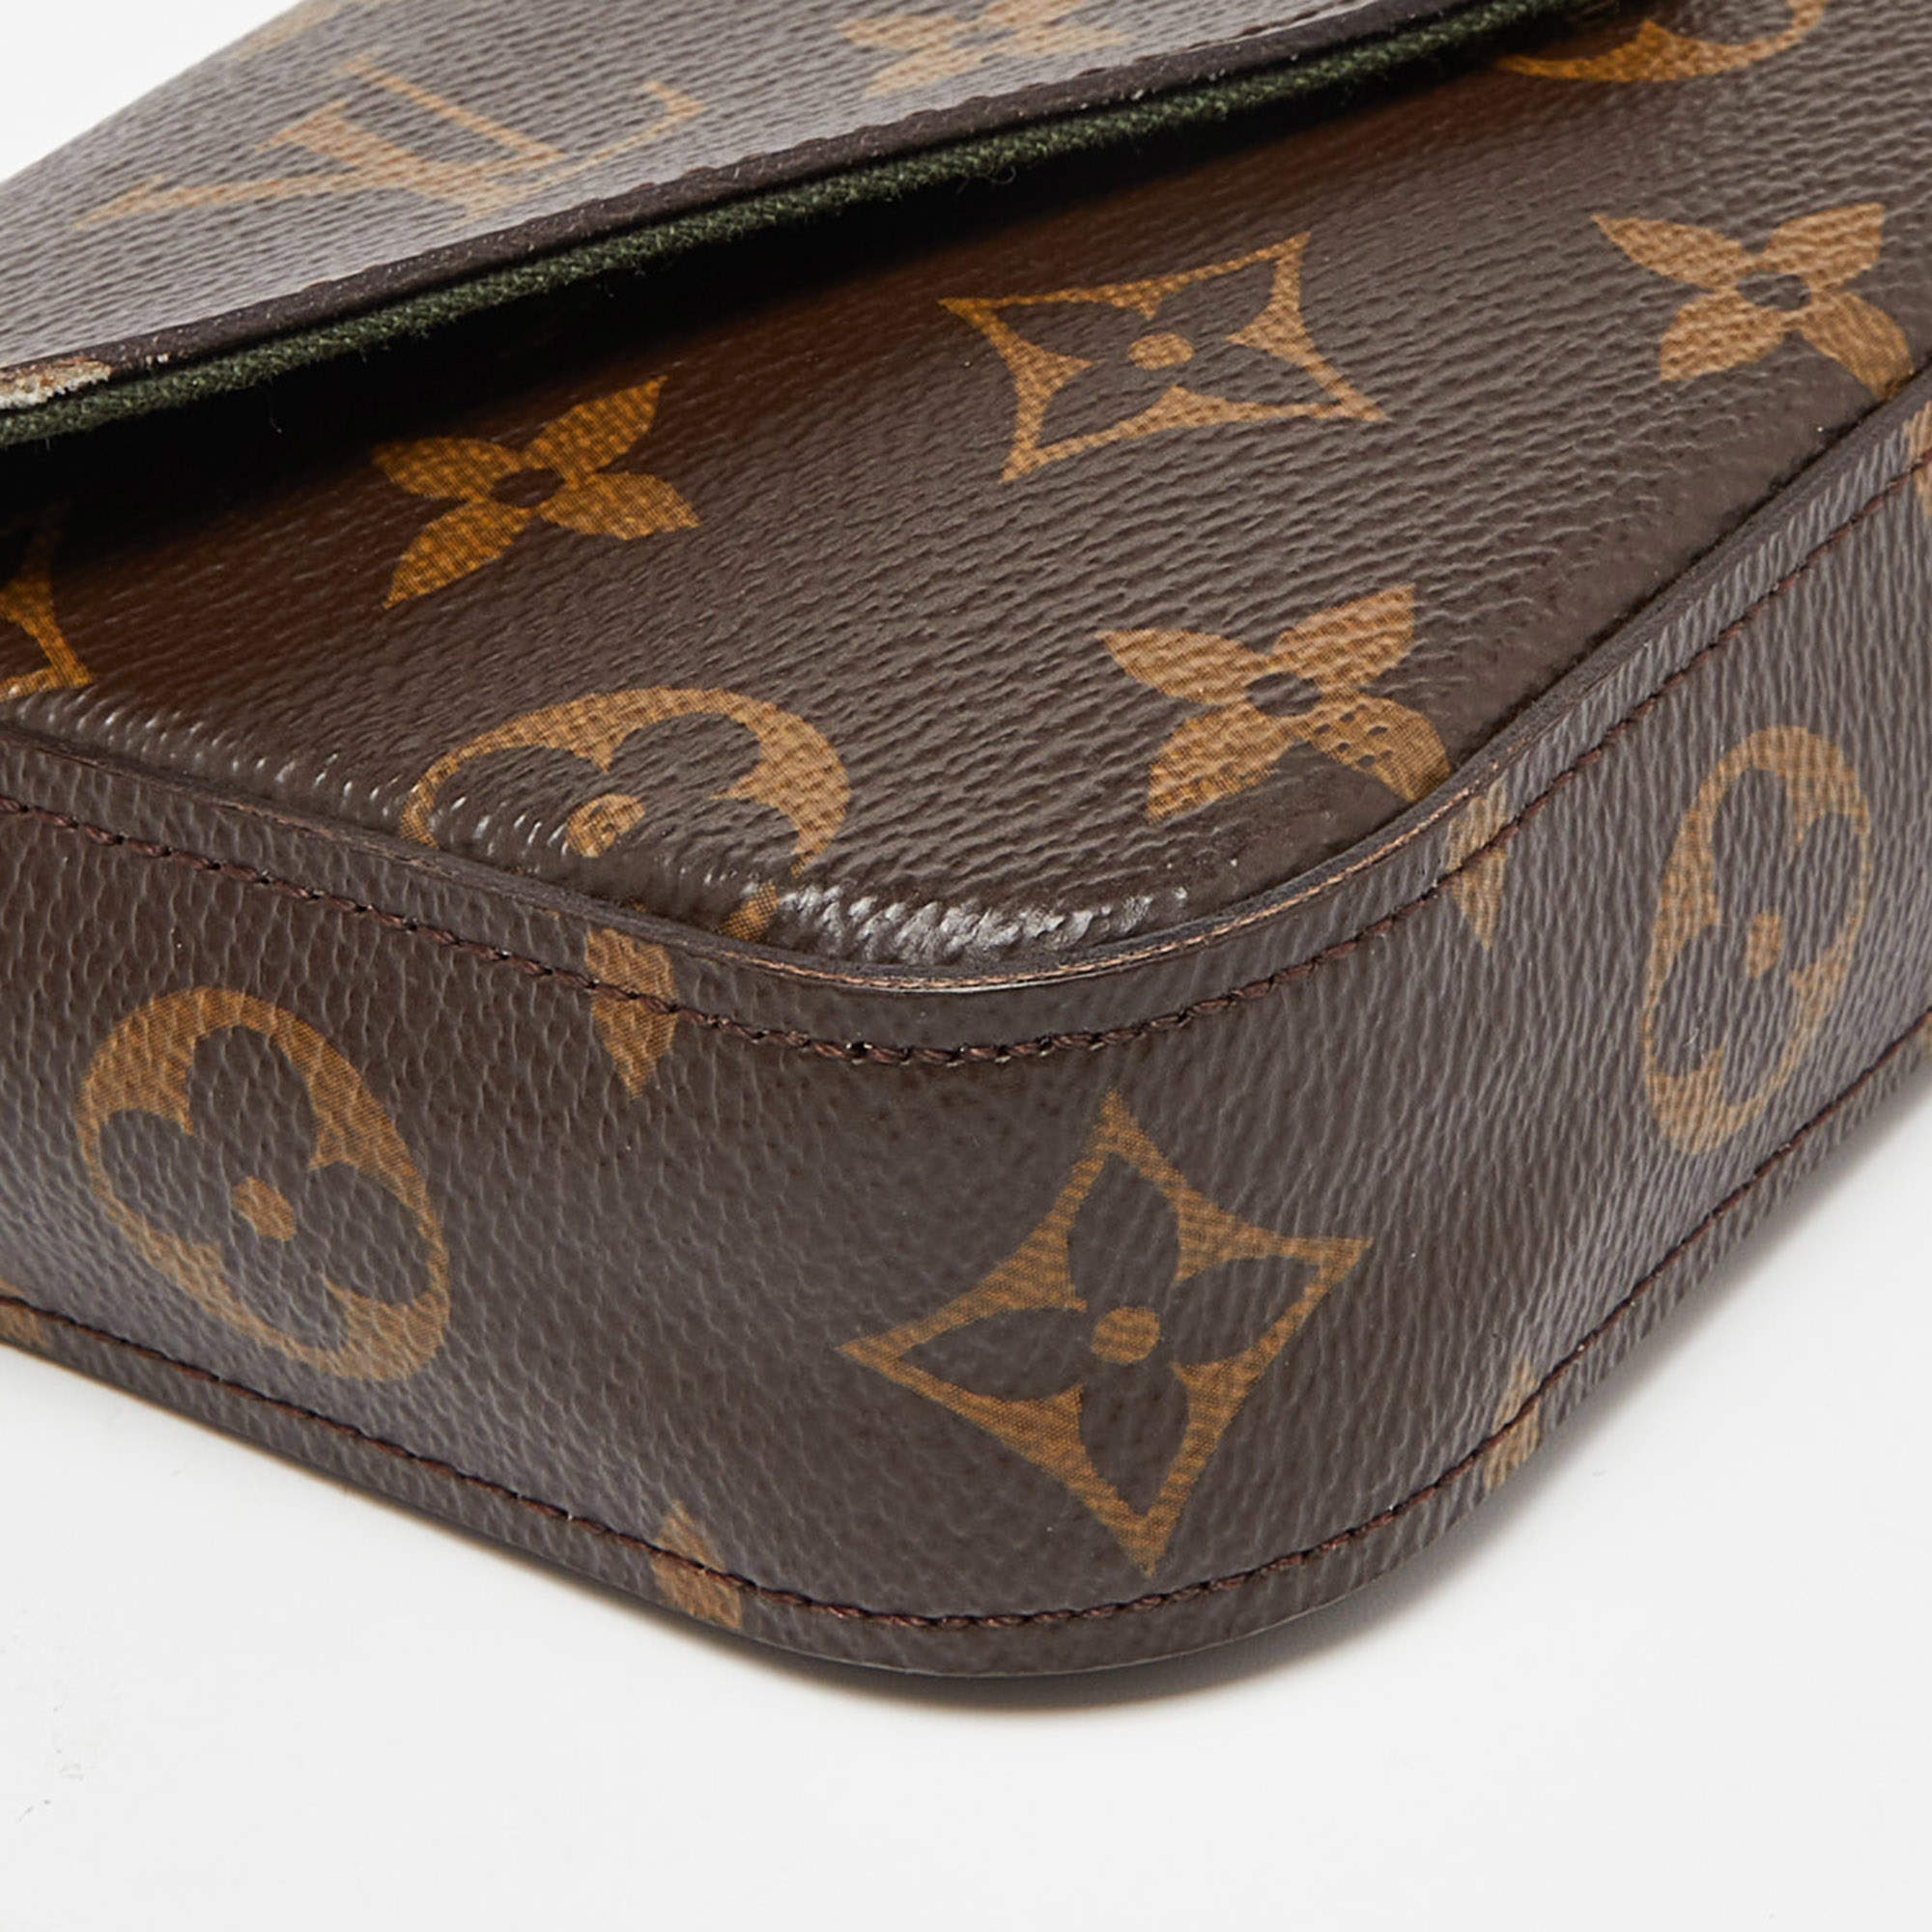 Félicie Strap & Go Monogram Canvas - Wallets and Small Leather Goods